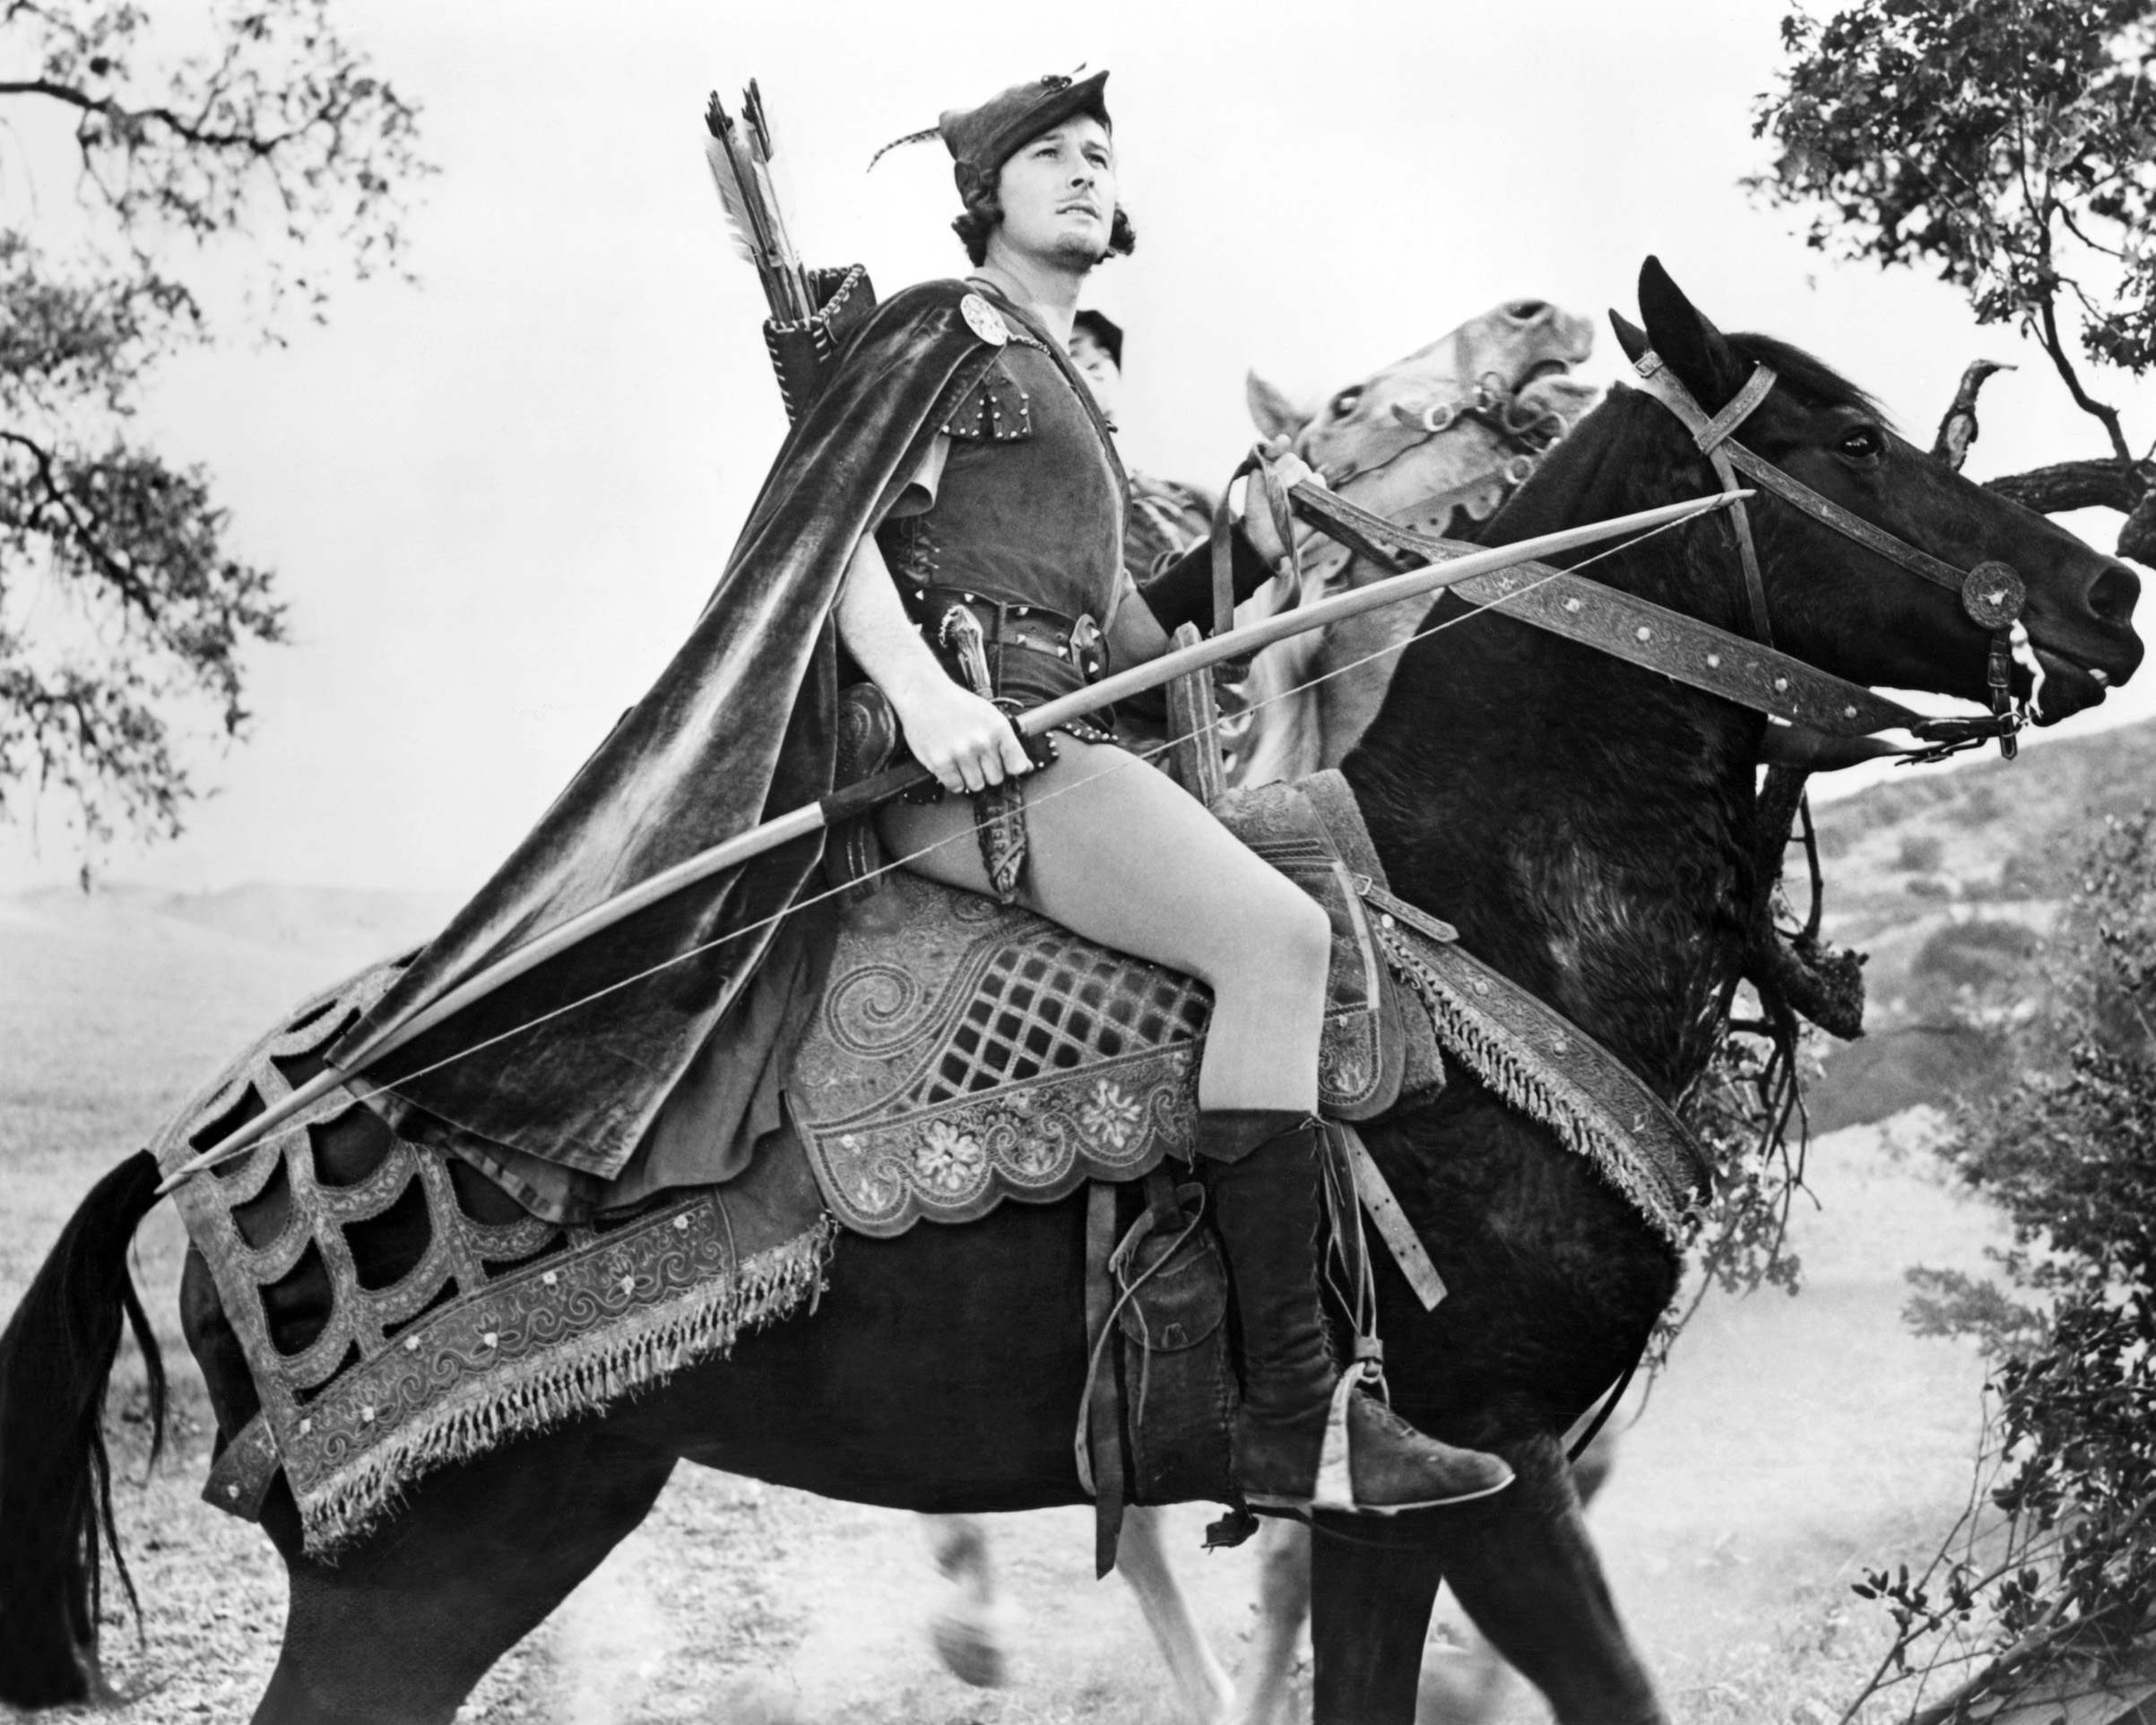 Actor Errol Flynn as Robin Hood in the film 'The Adventures of Robin Hood', 1938. (Silver Screen Collection/Getty Images)